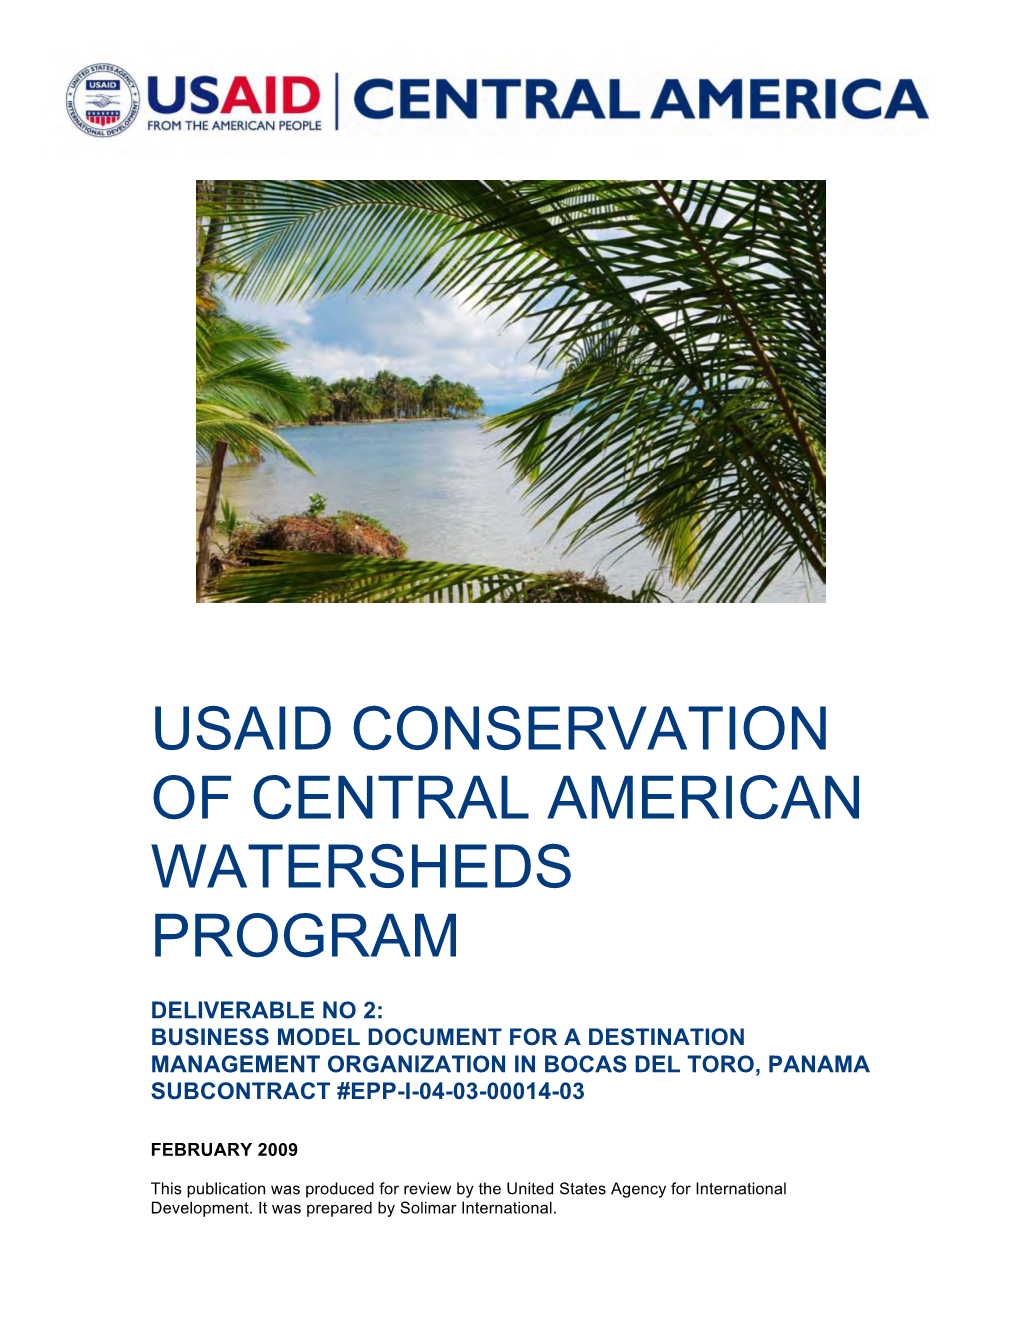 Usaid Conservation of Central American Watersheds